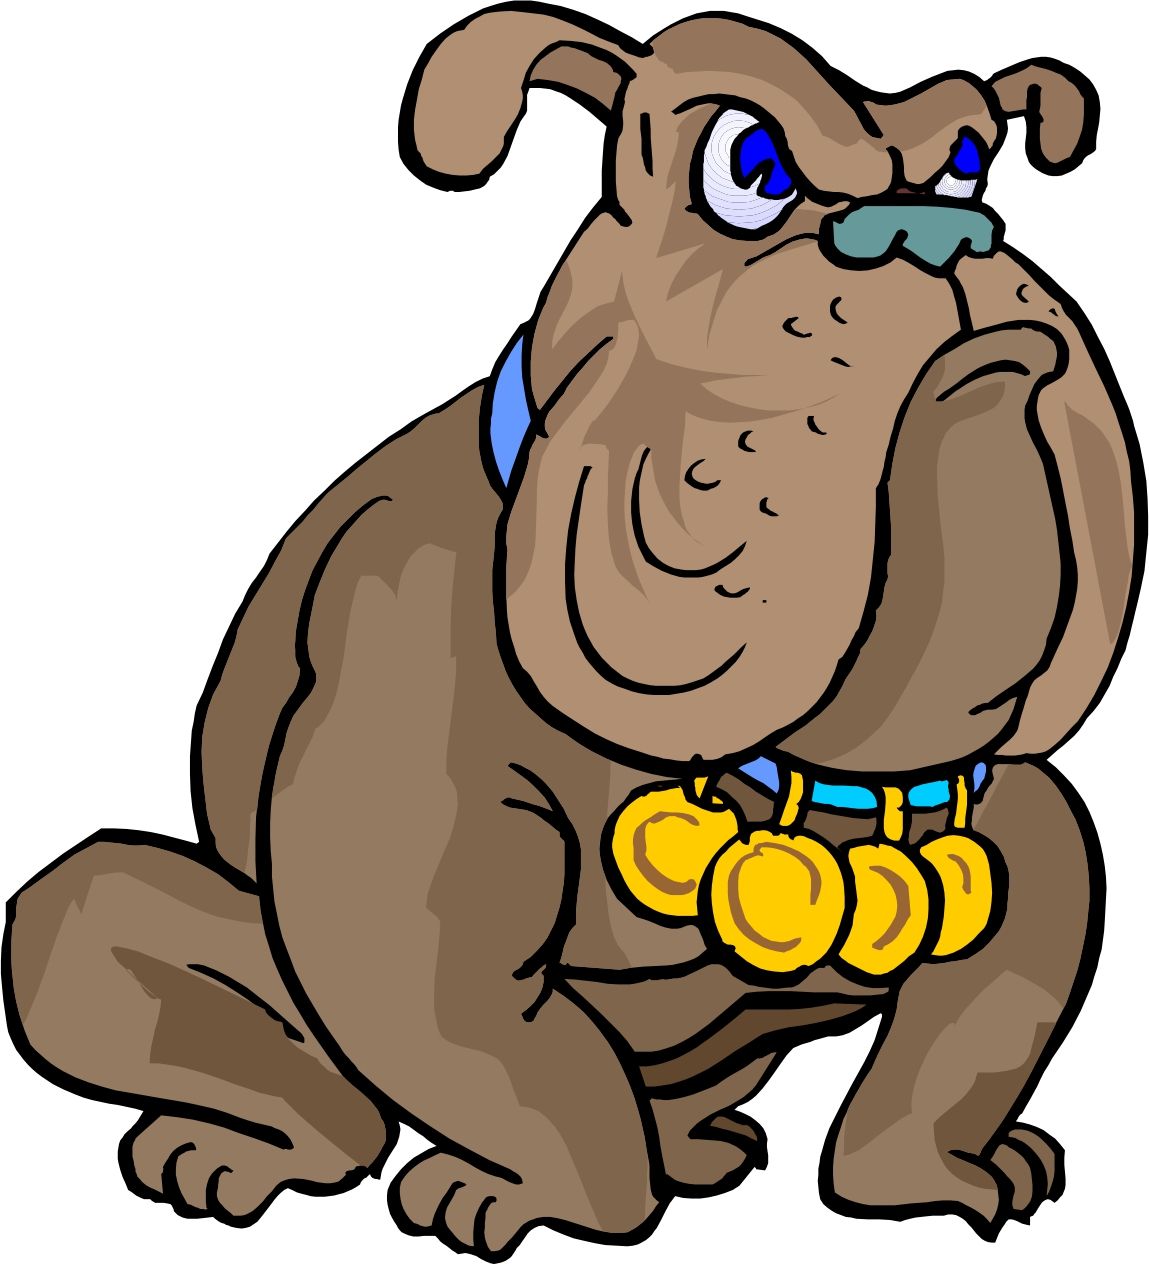 Free Animated Bulldog Picture, Download Free Clip Art, Free Clip Art on Clipart Library